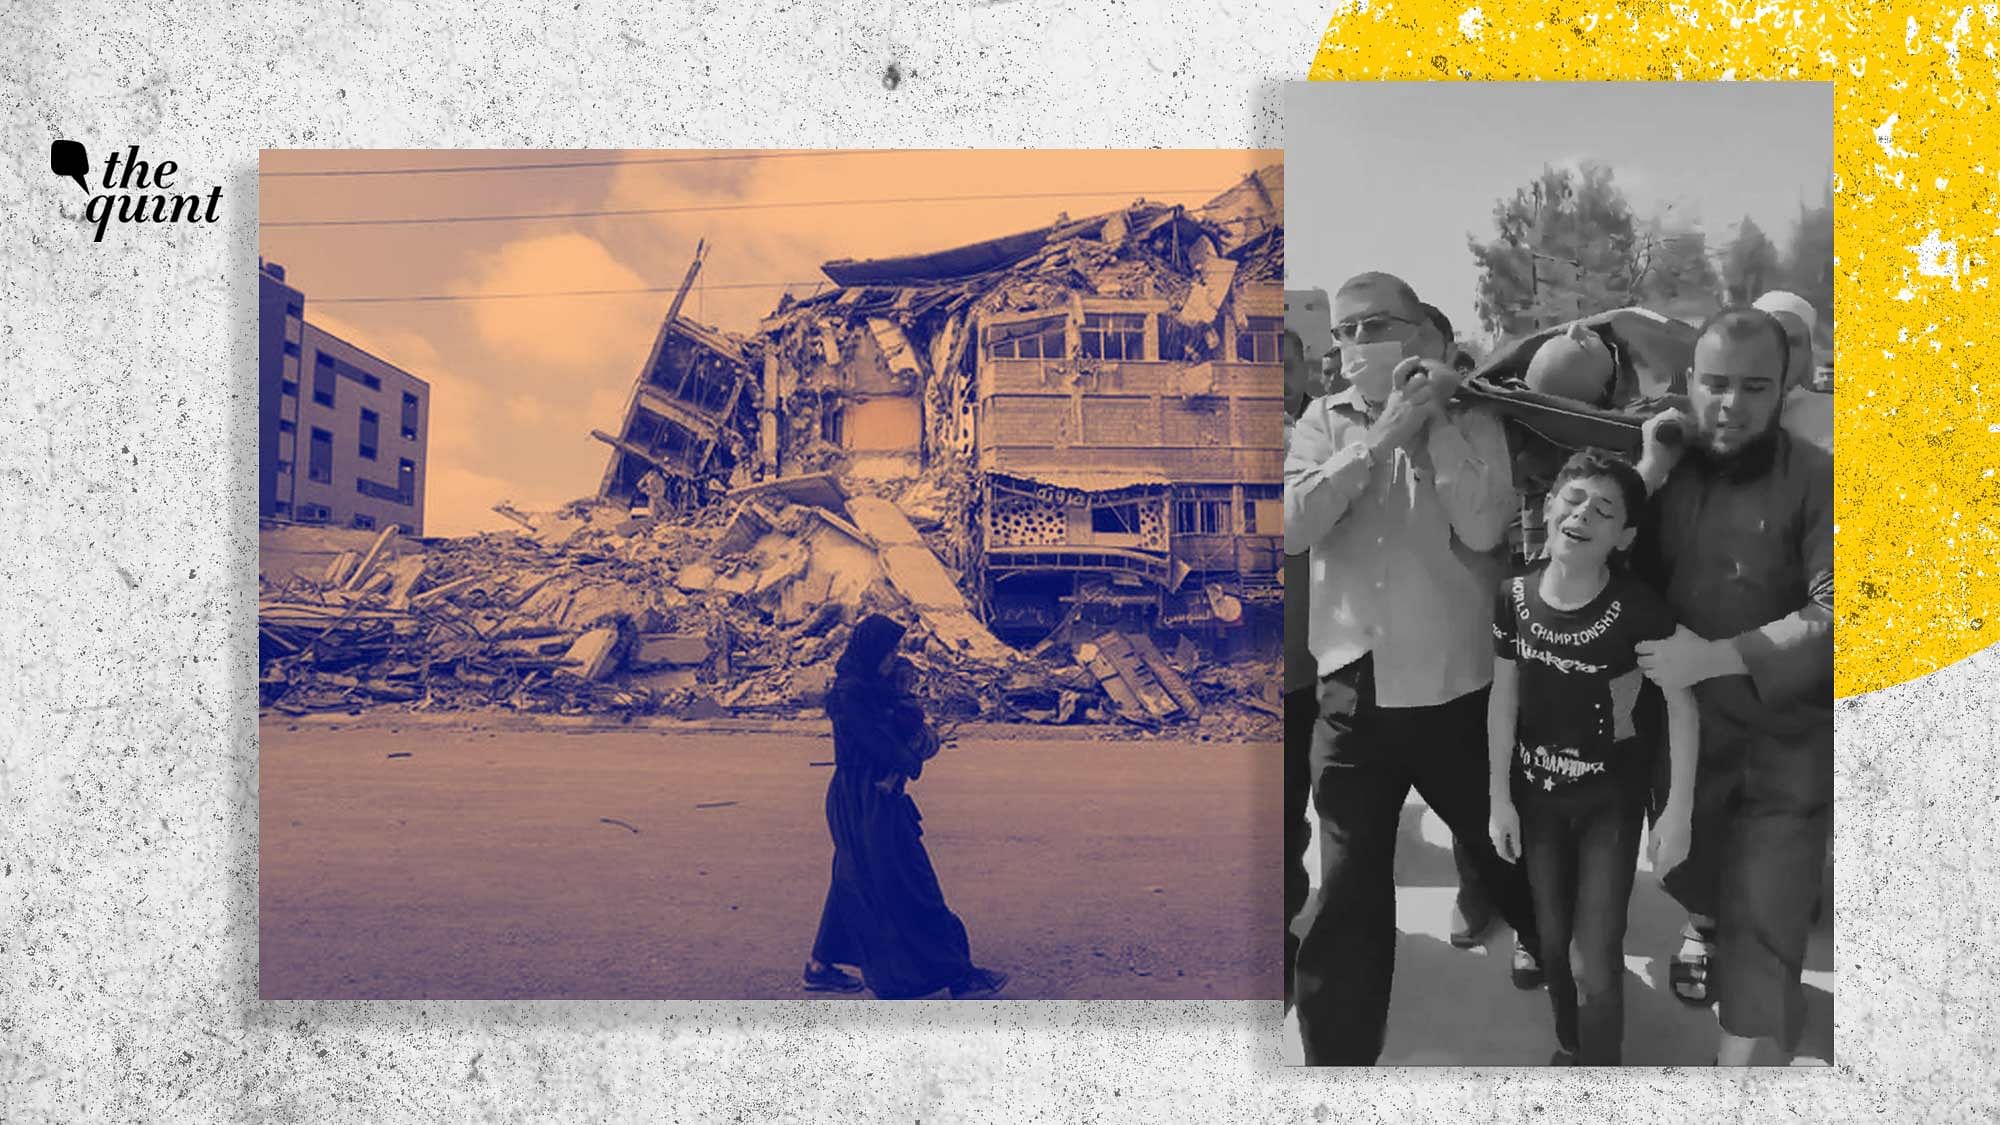 The internet is flooded with videos of destruction, despair, distress and displacement.